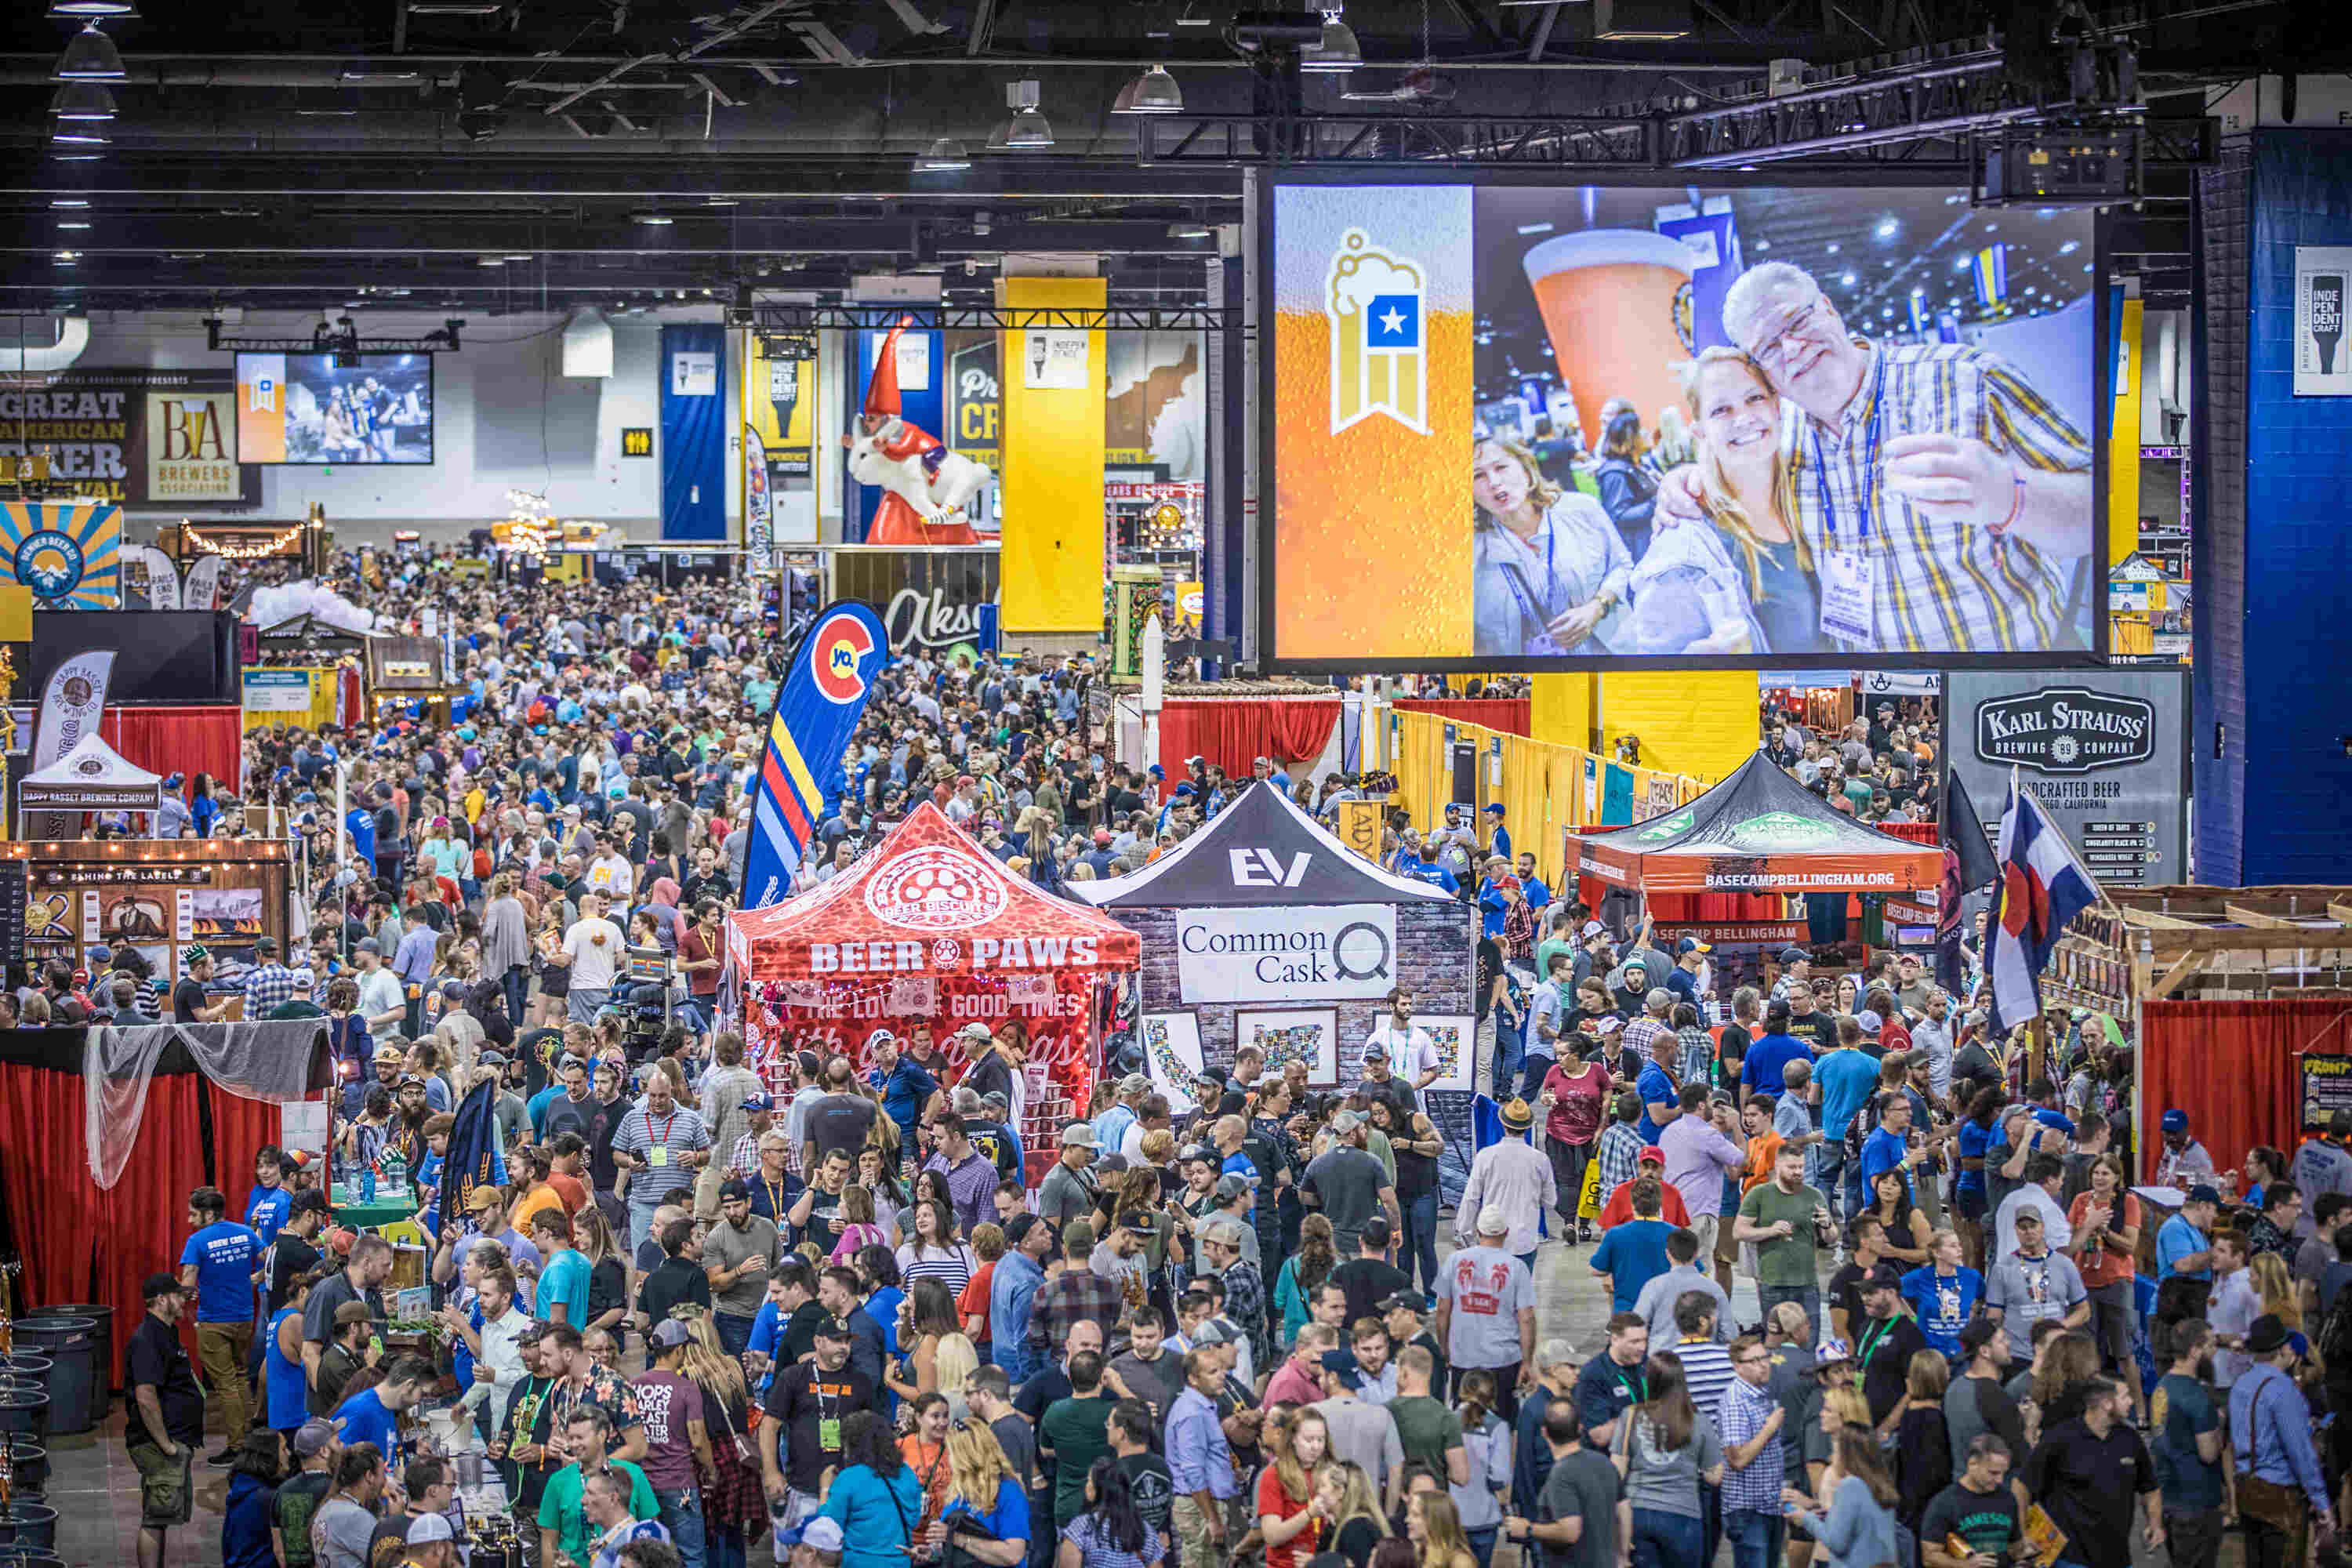 17 Facts About Great American Beer Festival